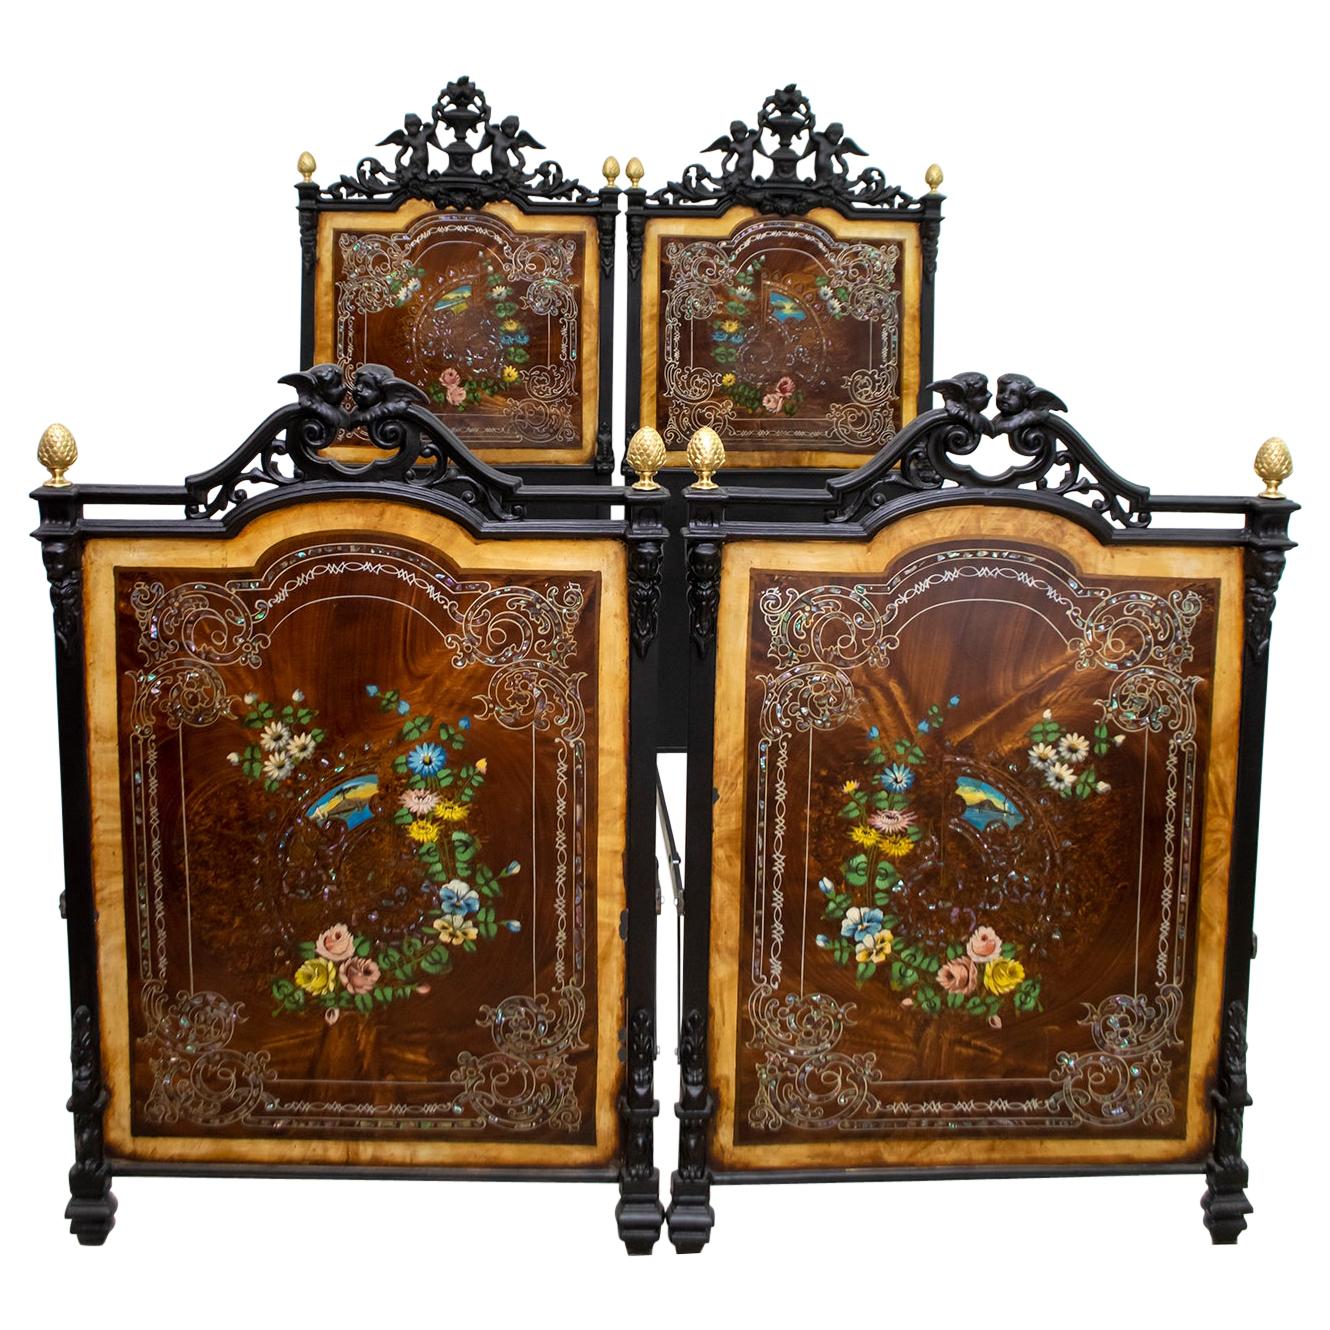 Pair of Single or Doble Beds 19th Century Italian Art Nouveau Hand Painted Iron